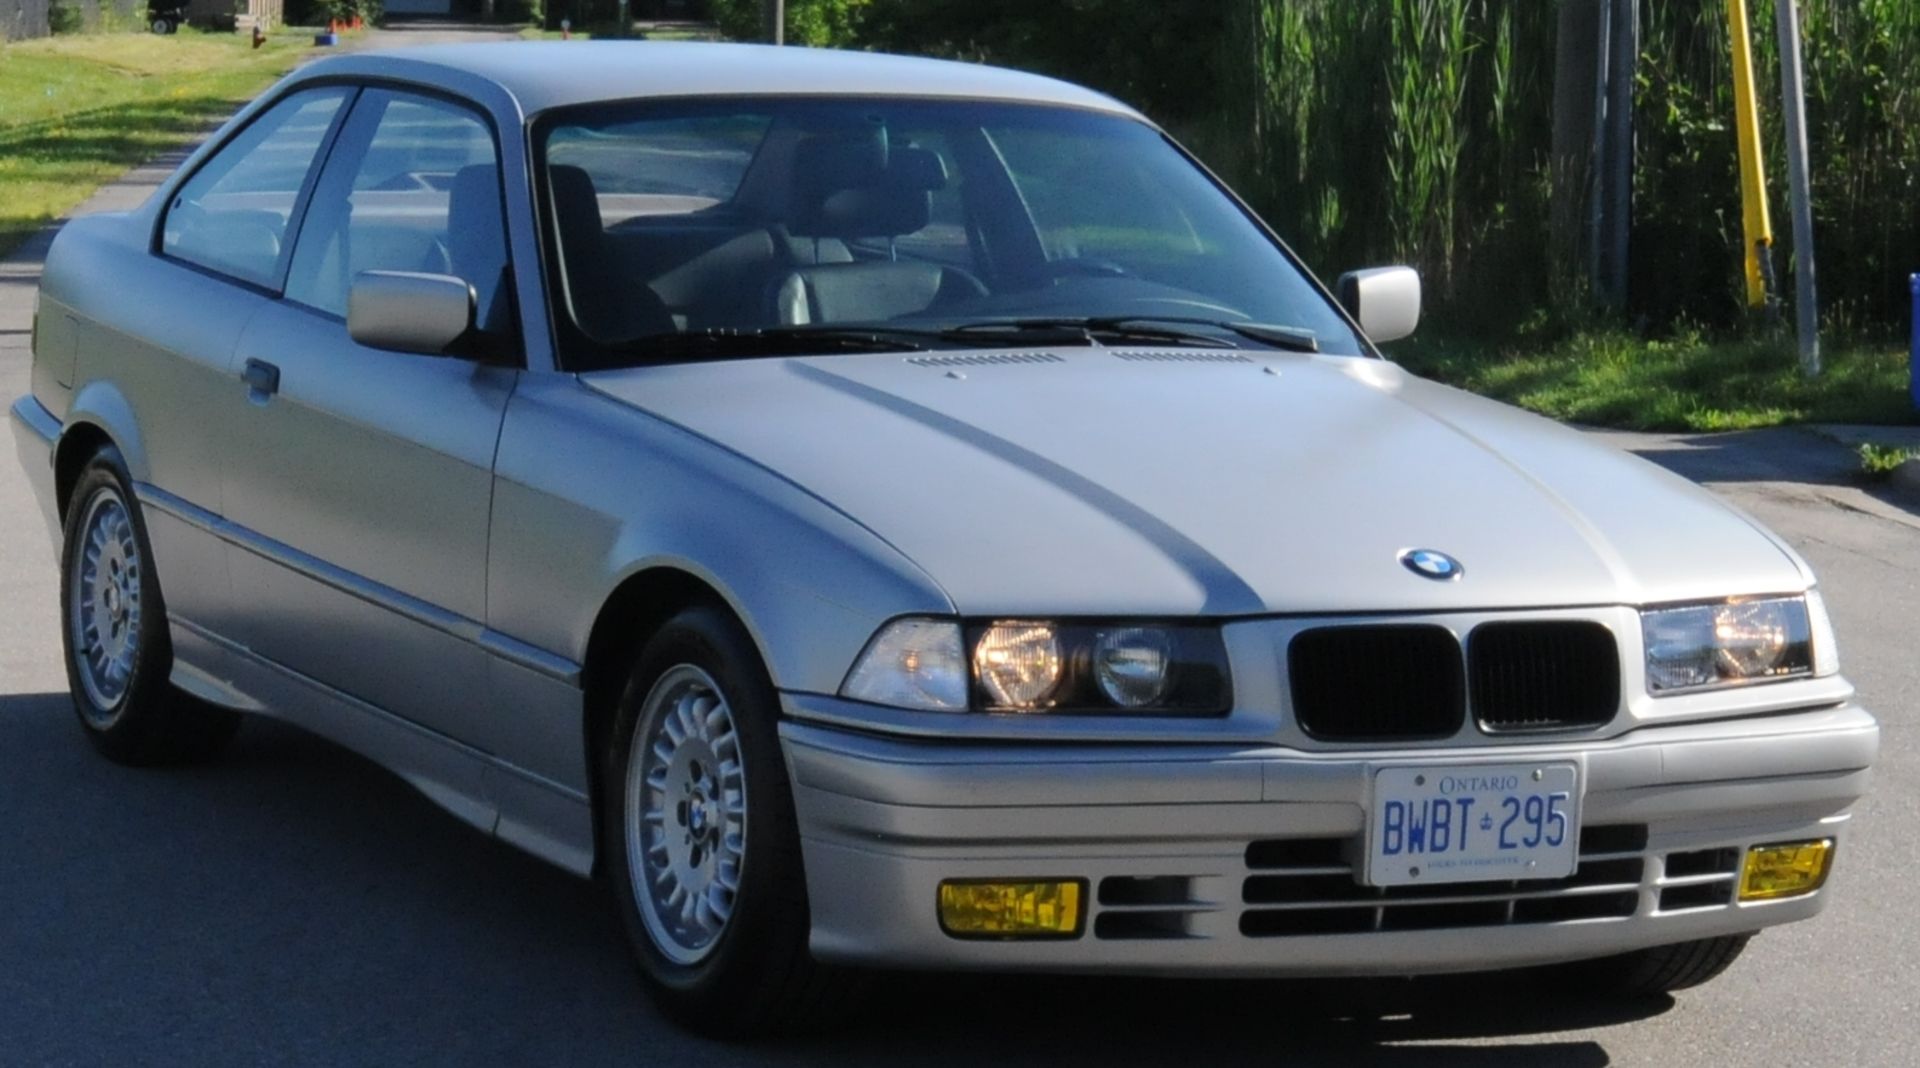 BMW (1993) E36 316IS COUPE WITH 1.8L VANOS VVT ENGINE, 5 SPEED MANUAL TRANSMISSION, REAR WHEEL - Image 2 of 5